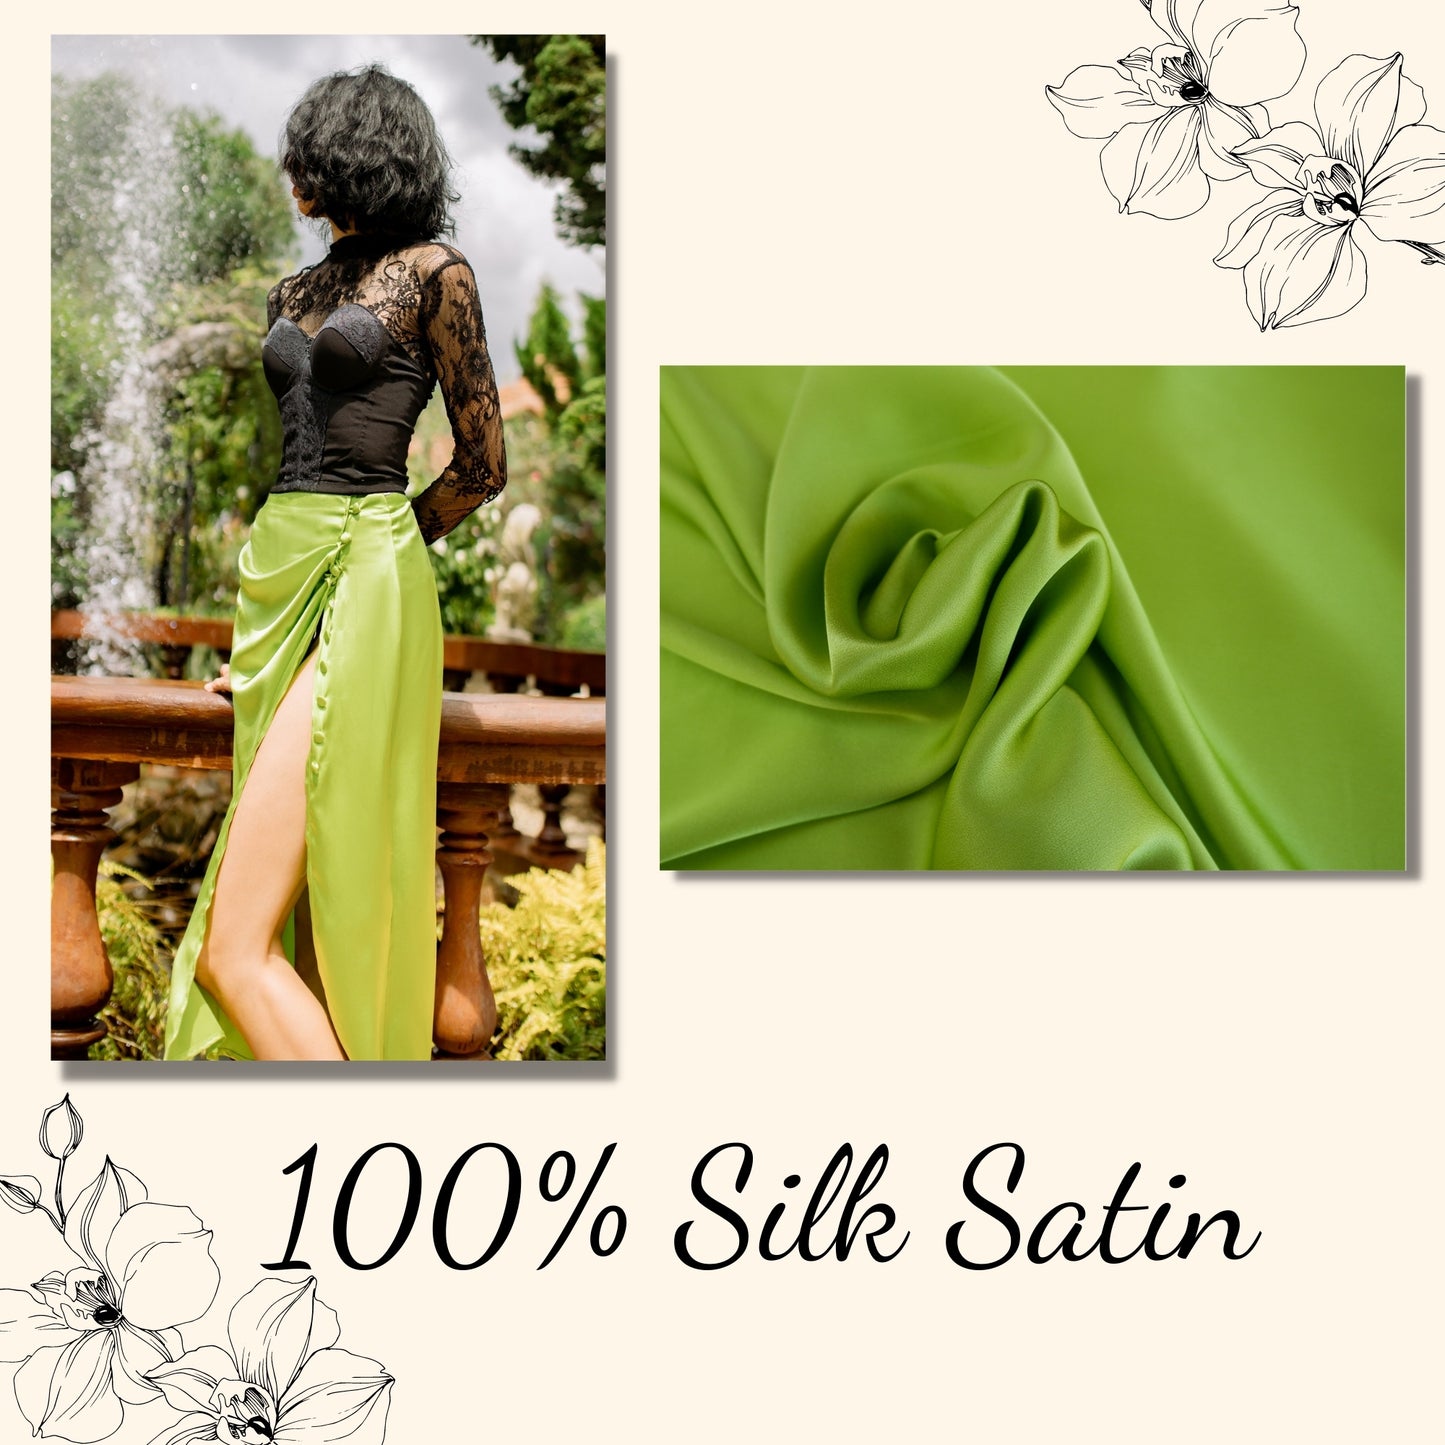 100% Mulberry Silk Satin Fabric - Dress making - Gift for women - Silk apparel fabric - Sewing clothes